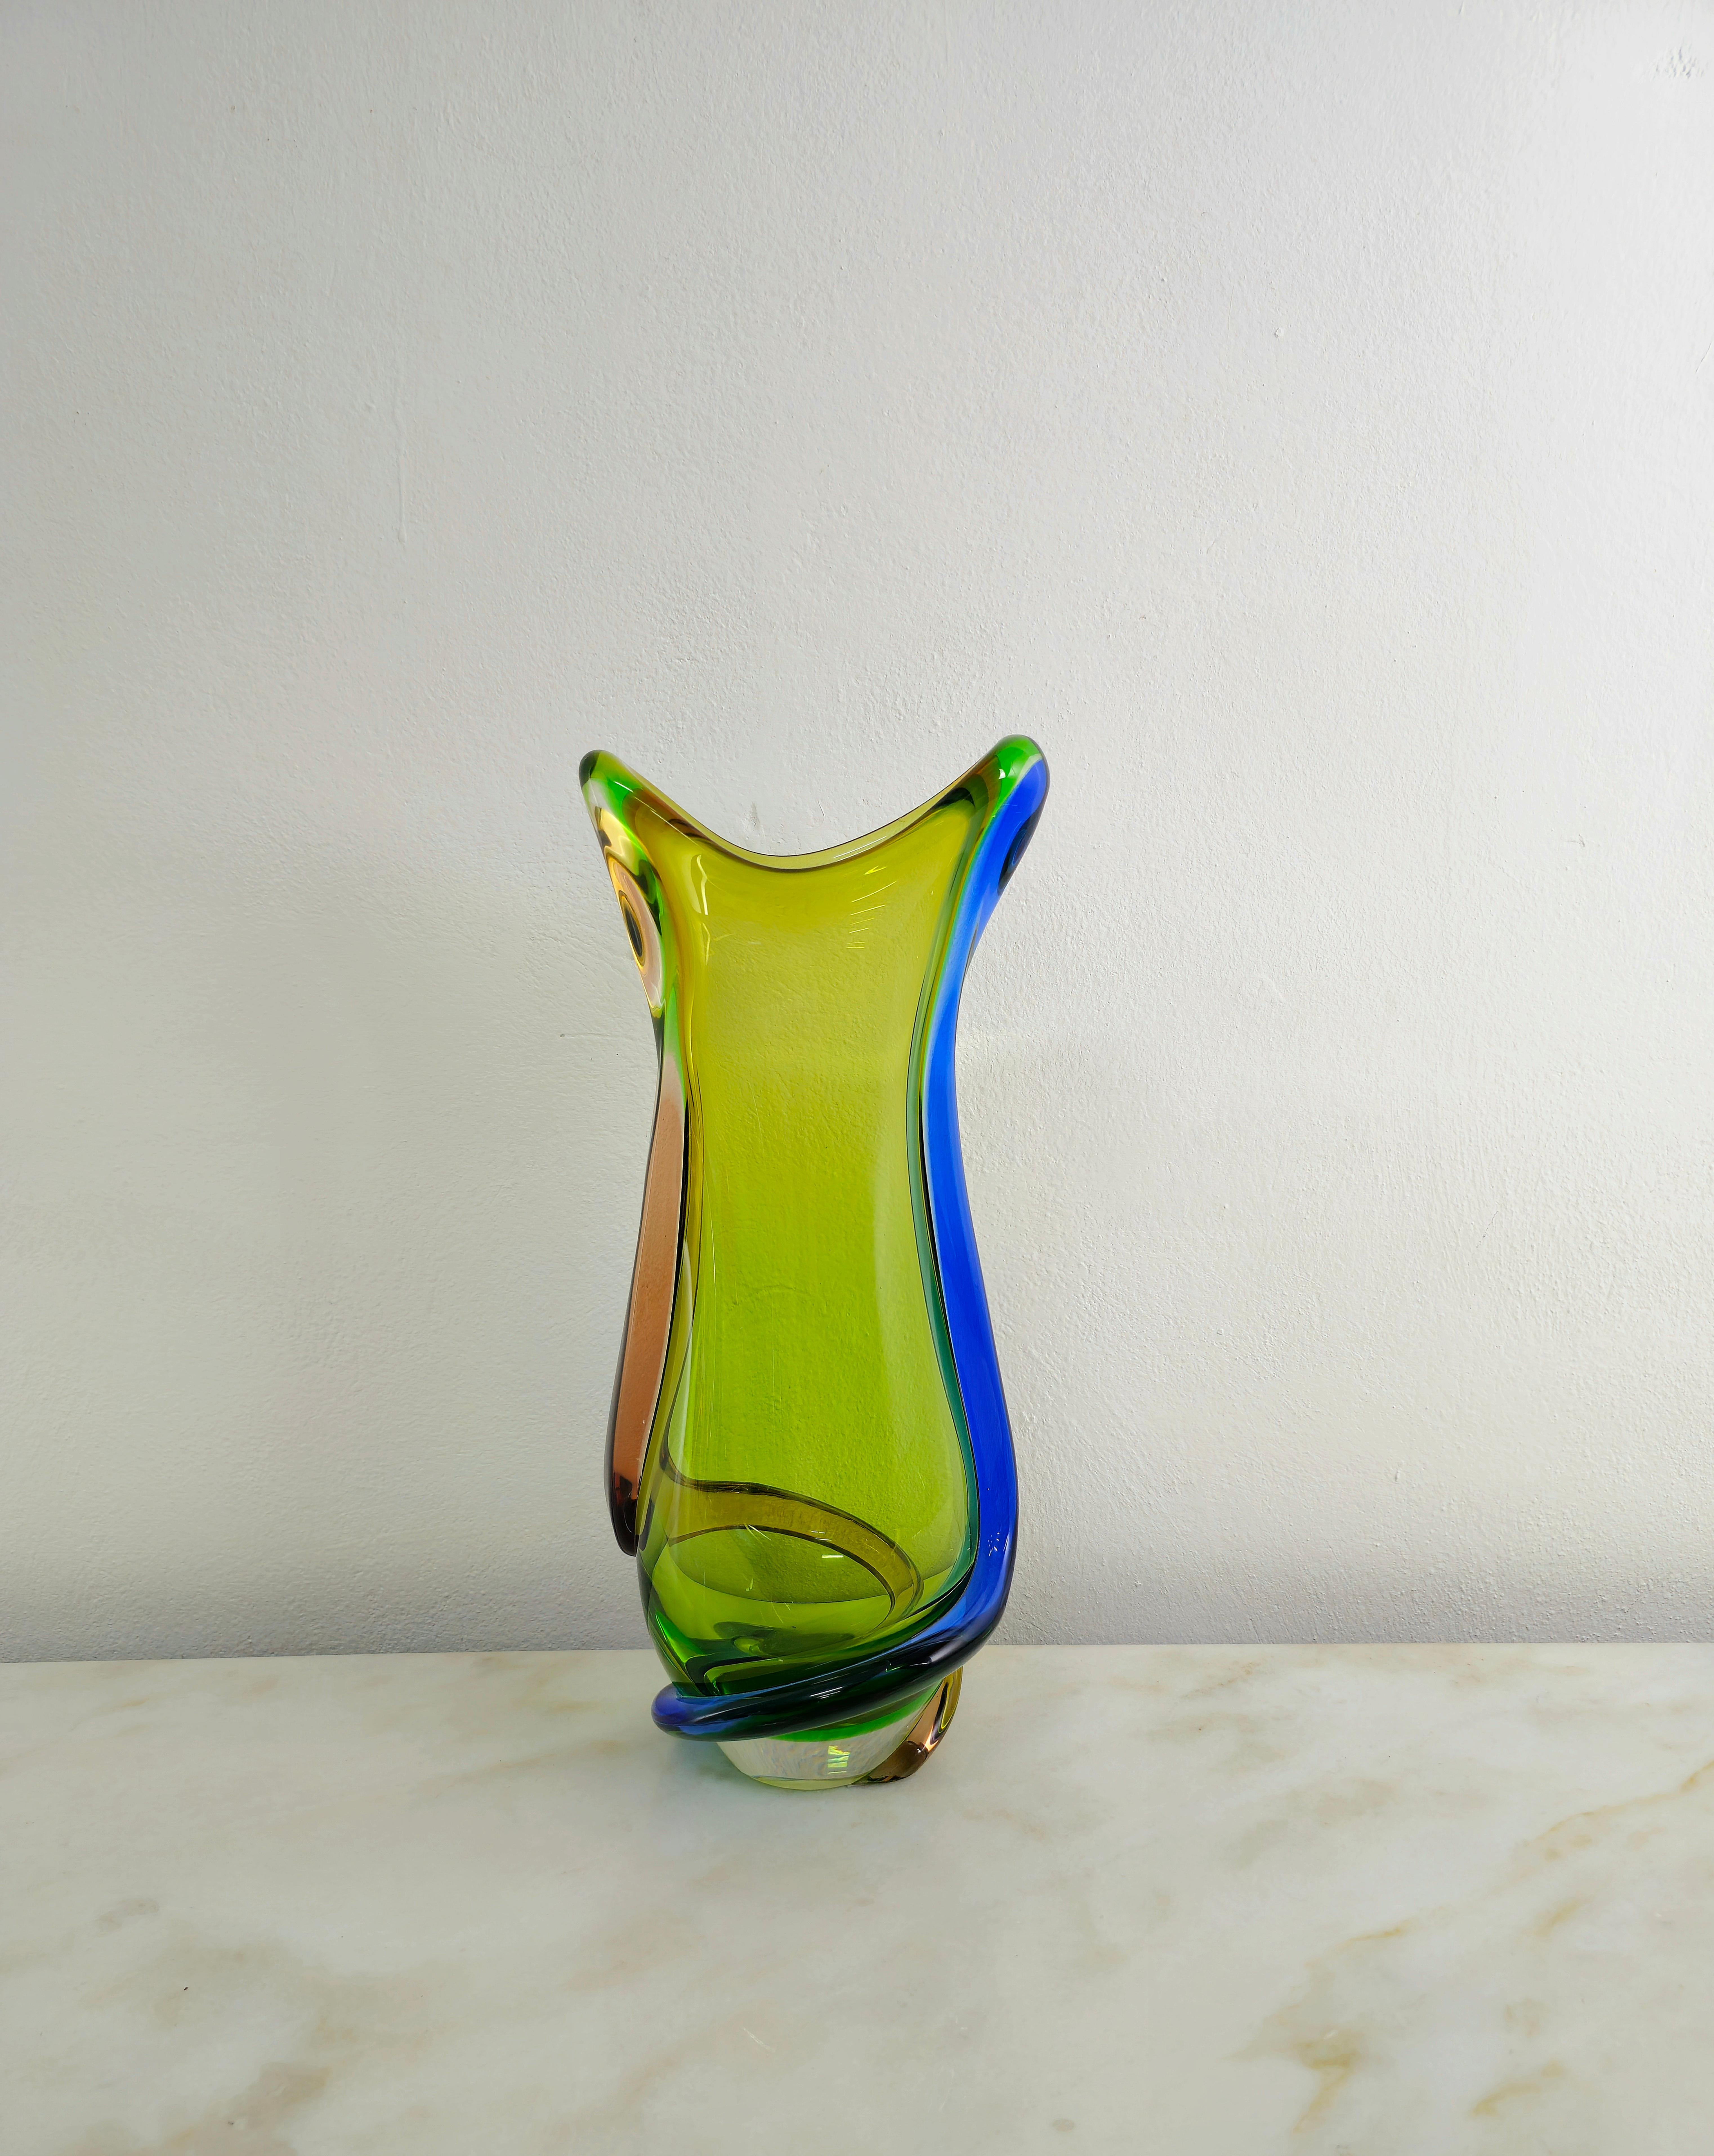 Vase Decorative Object Murano Glass Attributed to Flavio Poli Midcentury 1970s For Sale 4